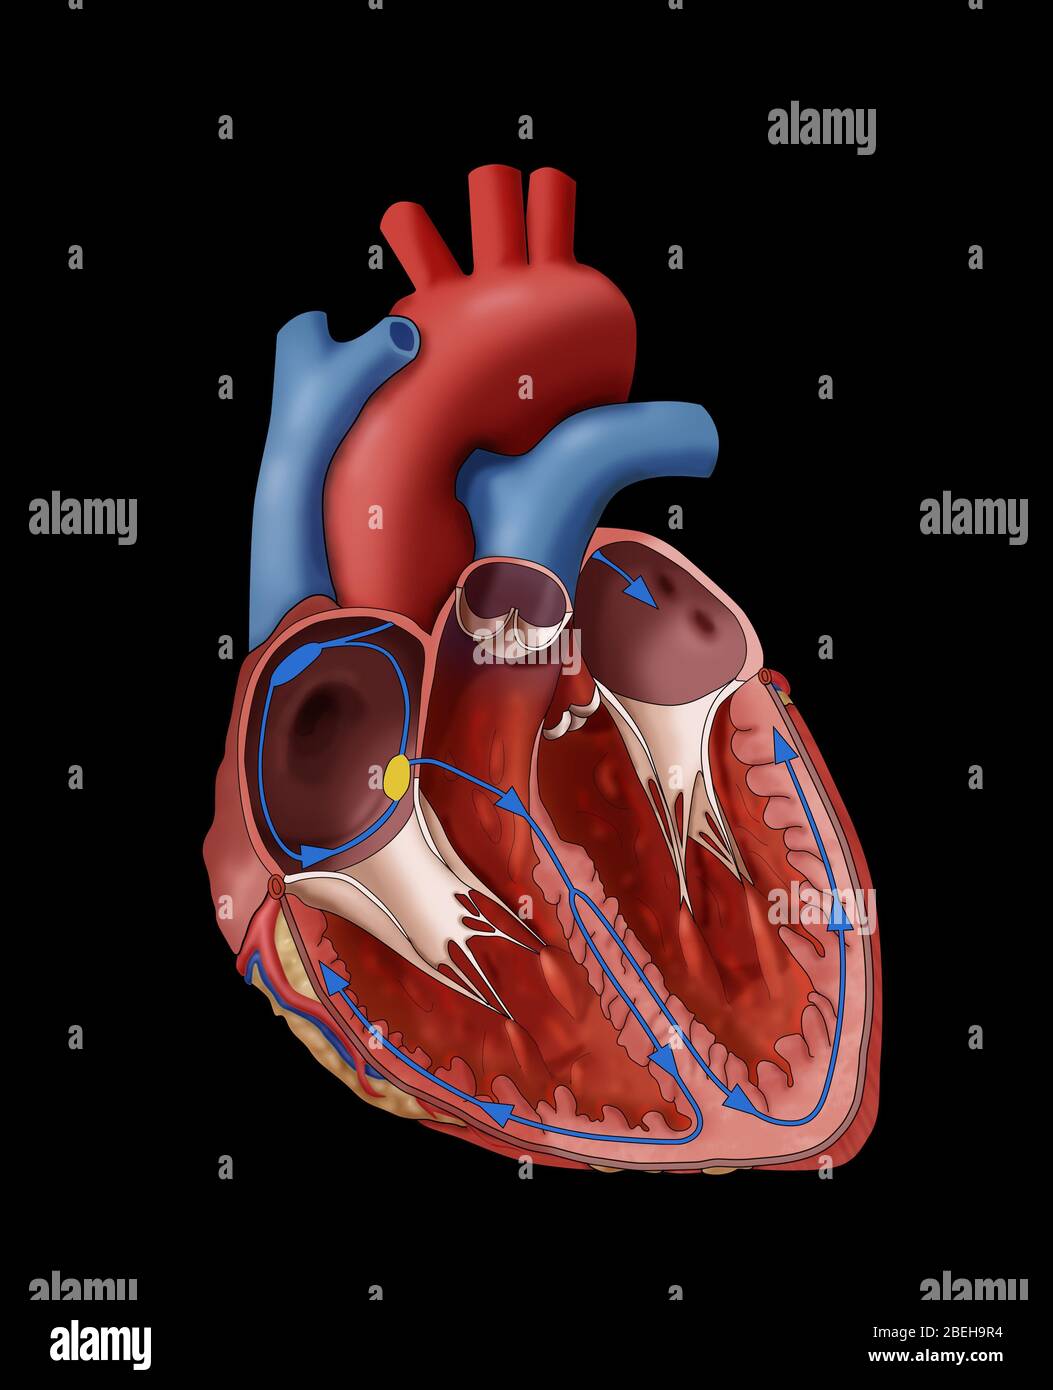 Illustration showing the electrical system of a normal heart and heartbeat. Stock Photo